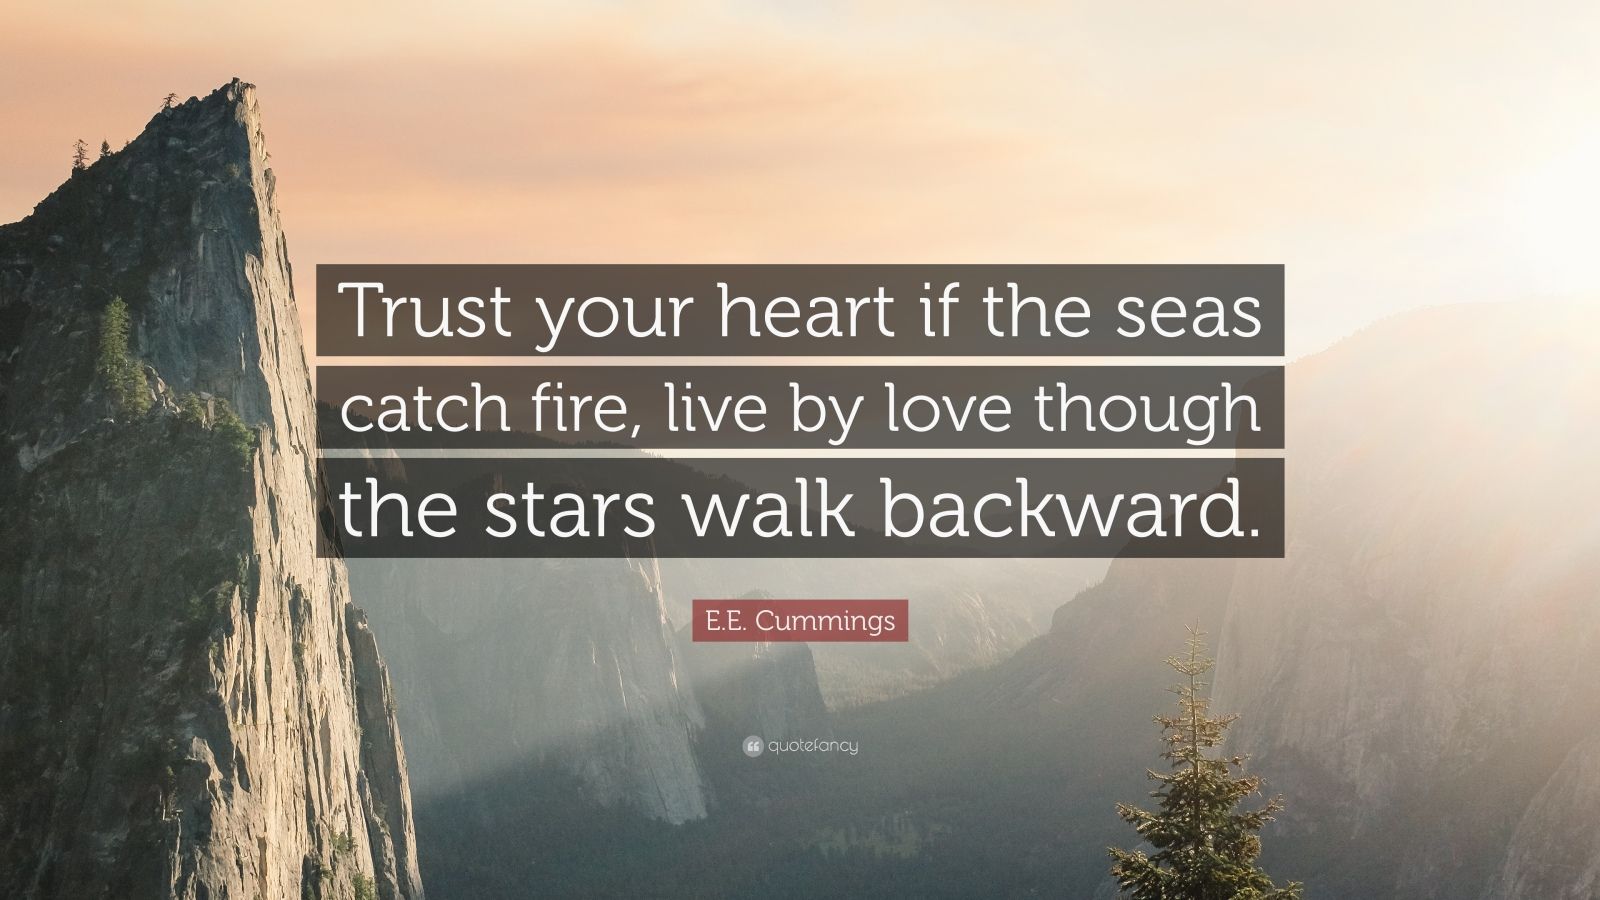 E.E. Cummings Quote: “Trust your heart if the seas catch fire, live by love though ...1600 x 900